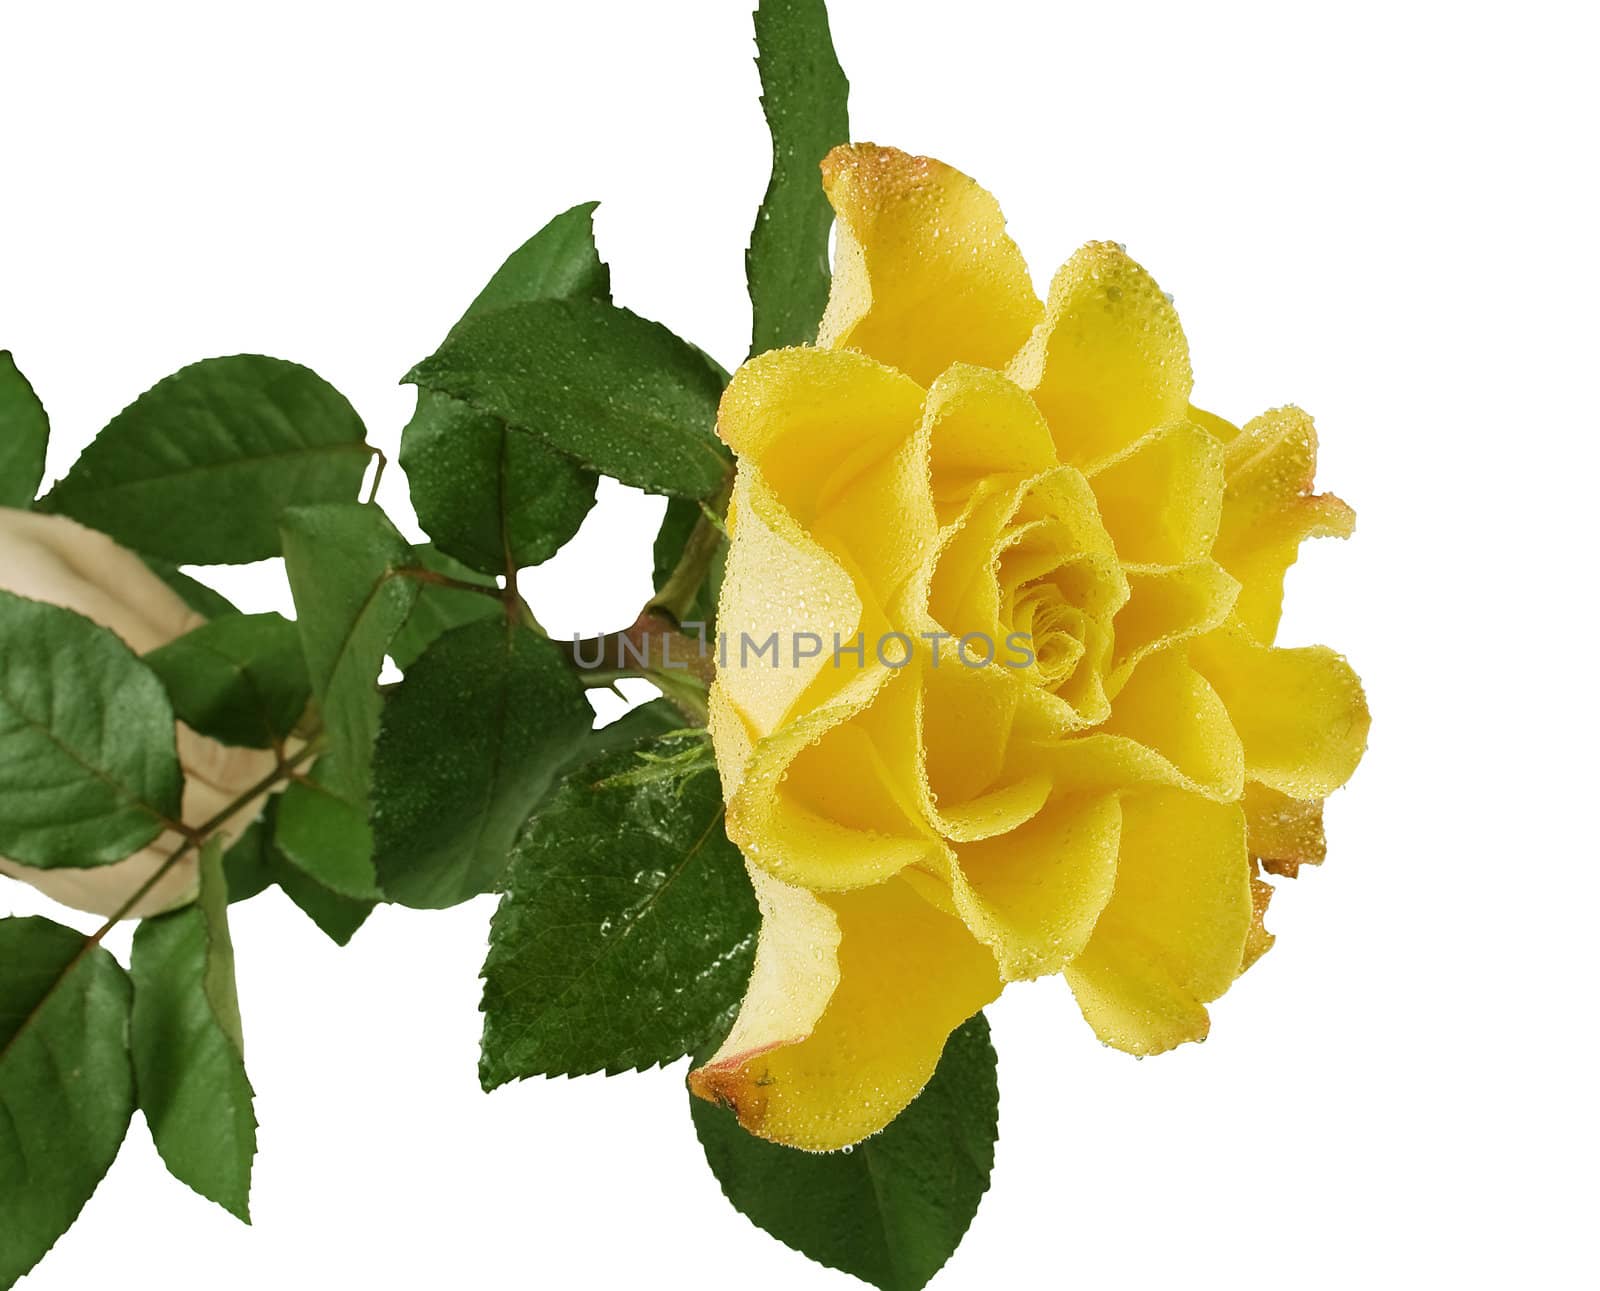 Yellow rose with green leafes on the whitw background by BIG_TAU